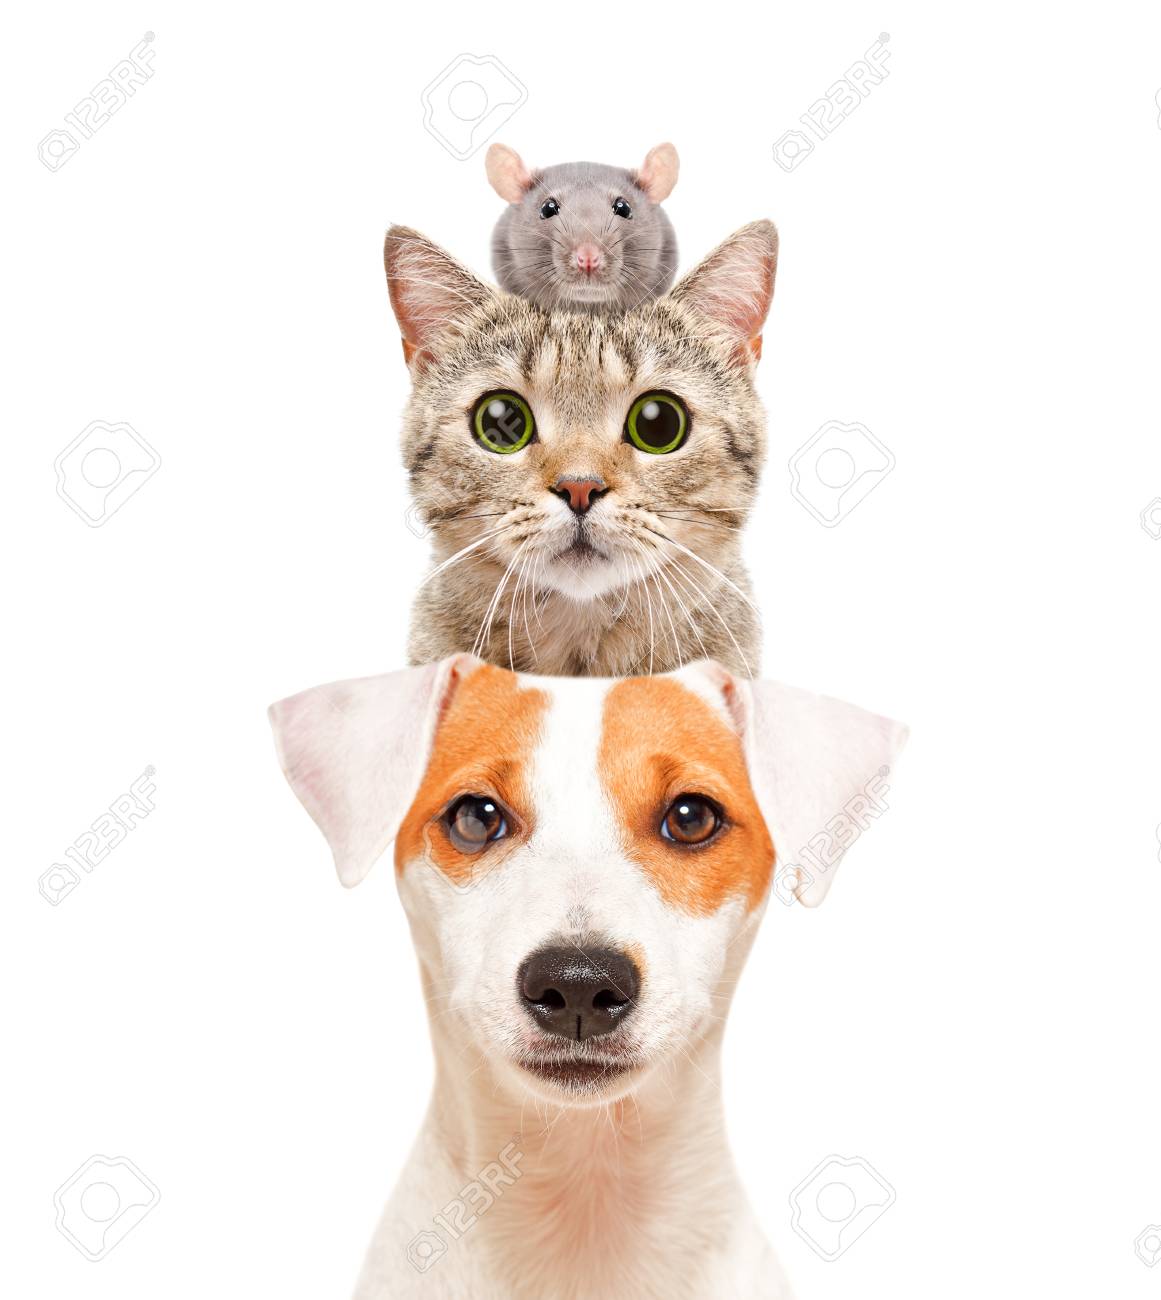 Funny Portrait Of Cute Pets Isolated On White Background Stock